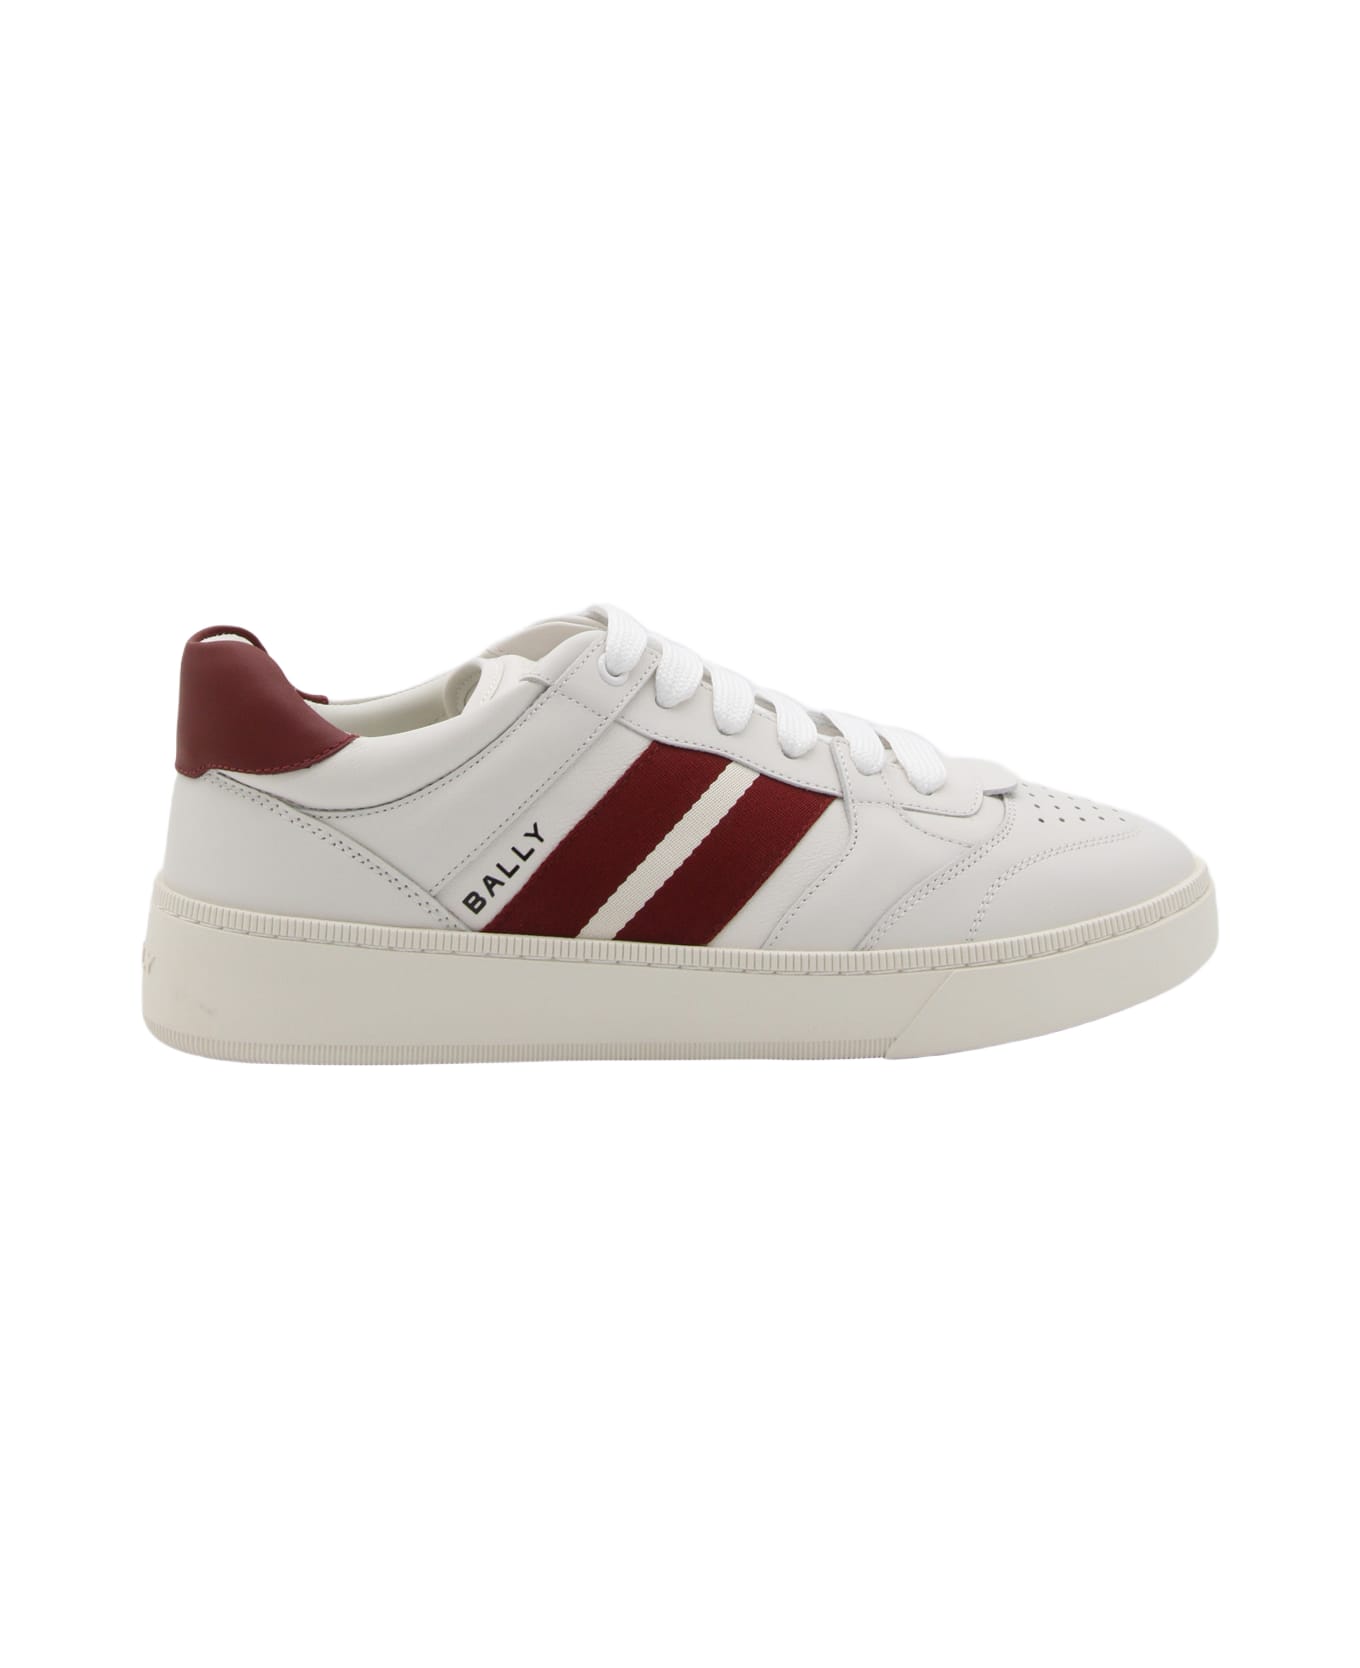 Bally White And Red Leather Sneakers - WHITE/BALLYRED スニーカー